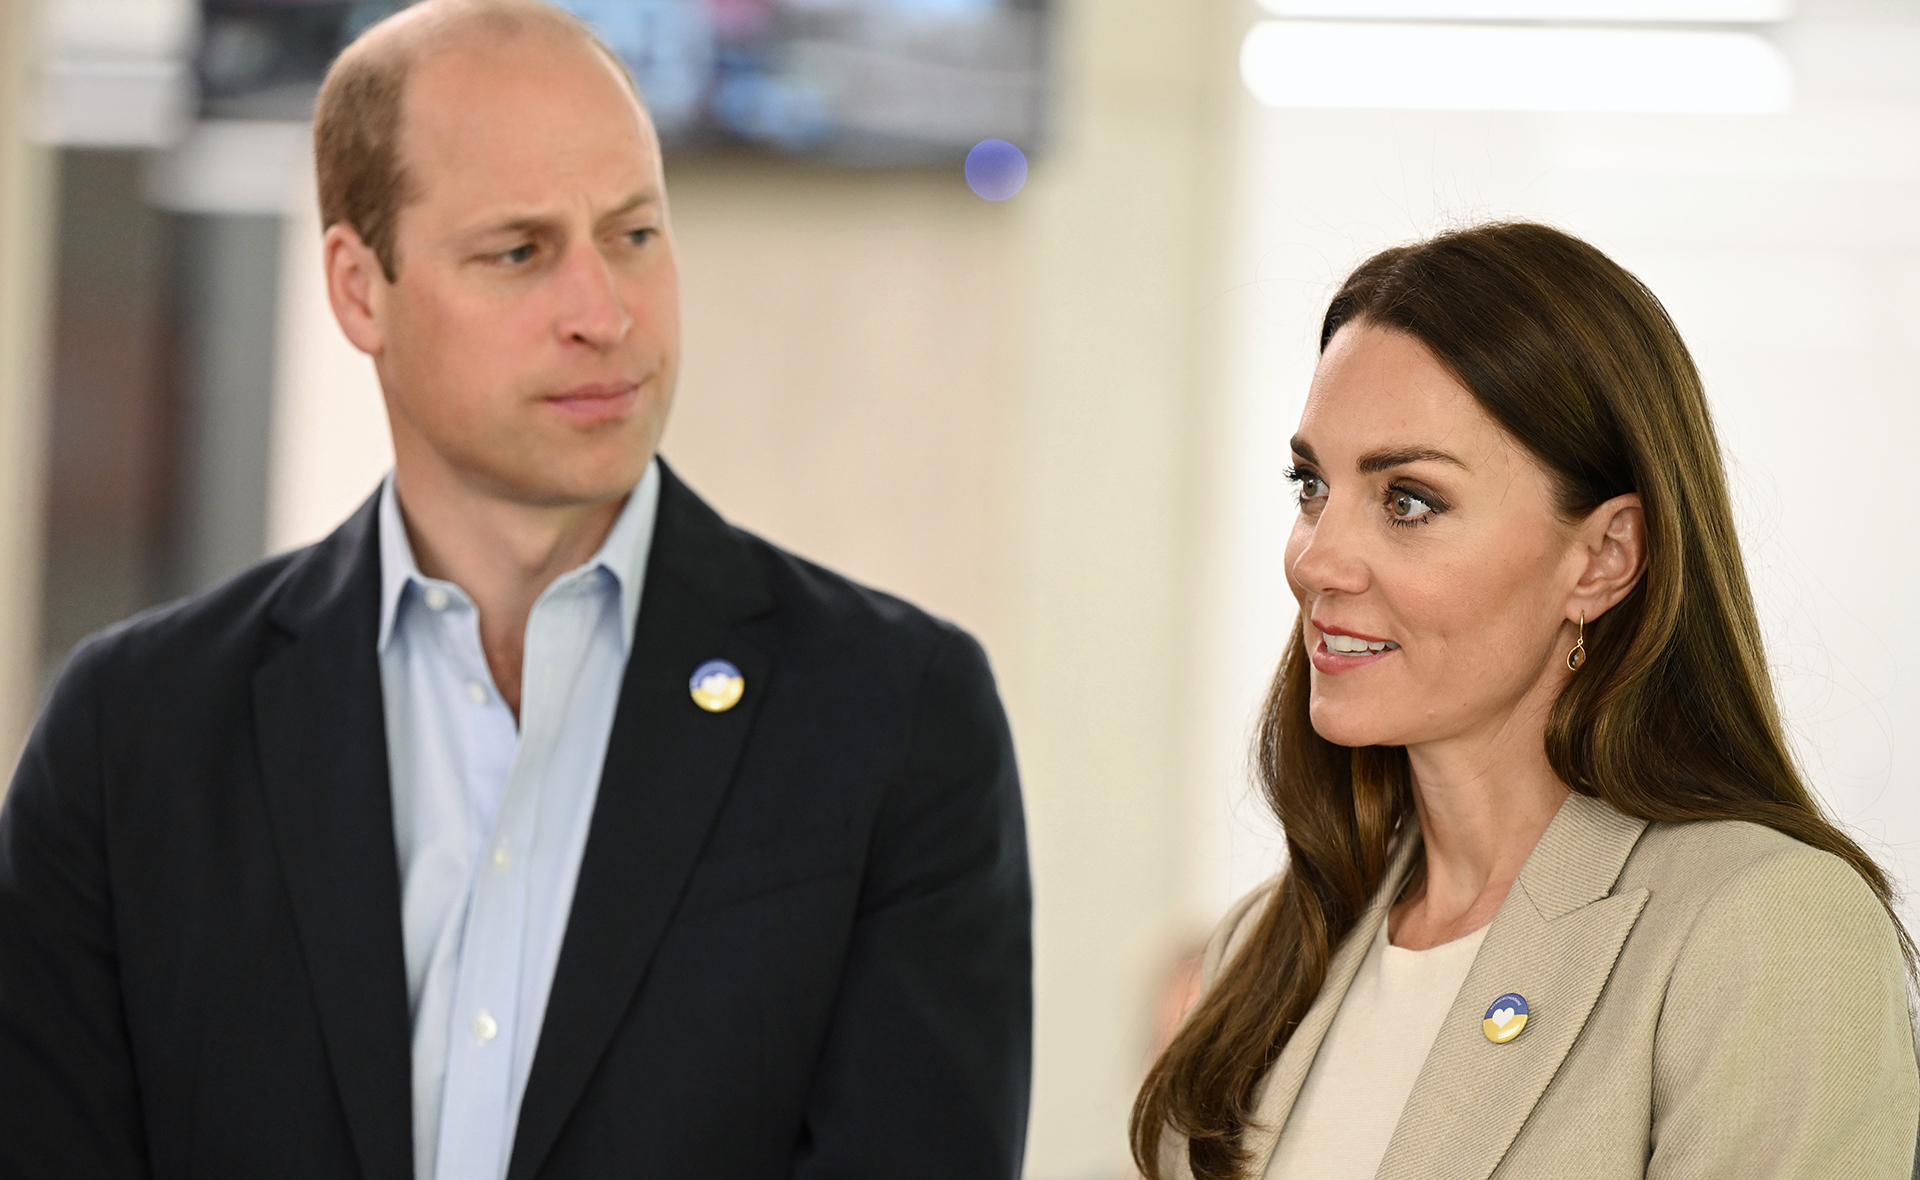 Catherine, Duchess of Cambridge’s touching gesture as she and Prince William show their support for Ukraine